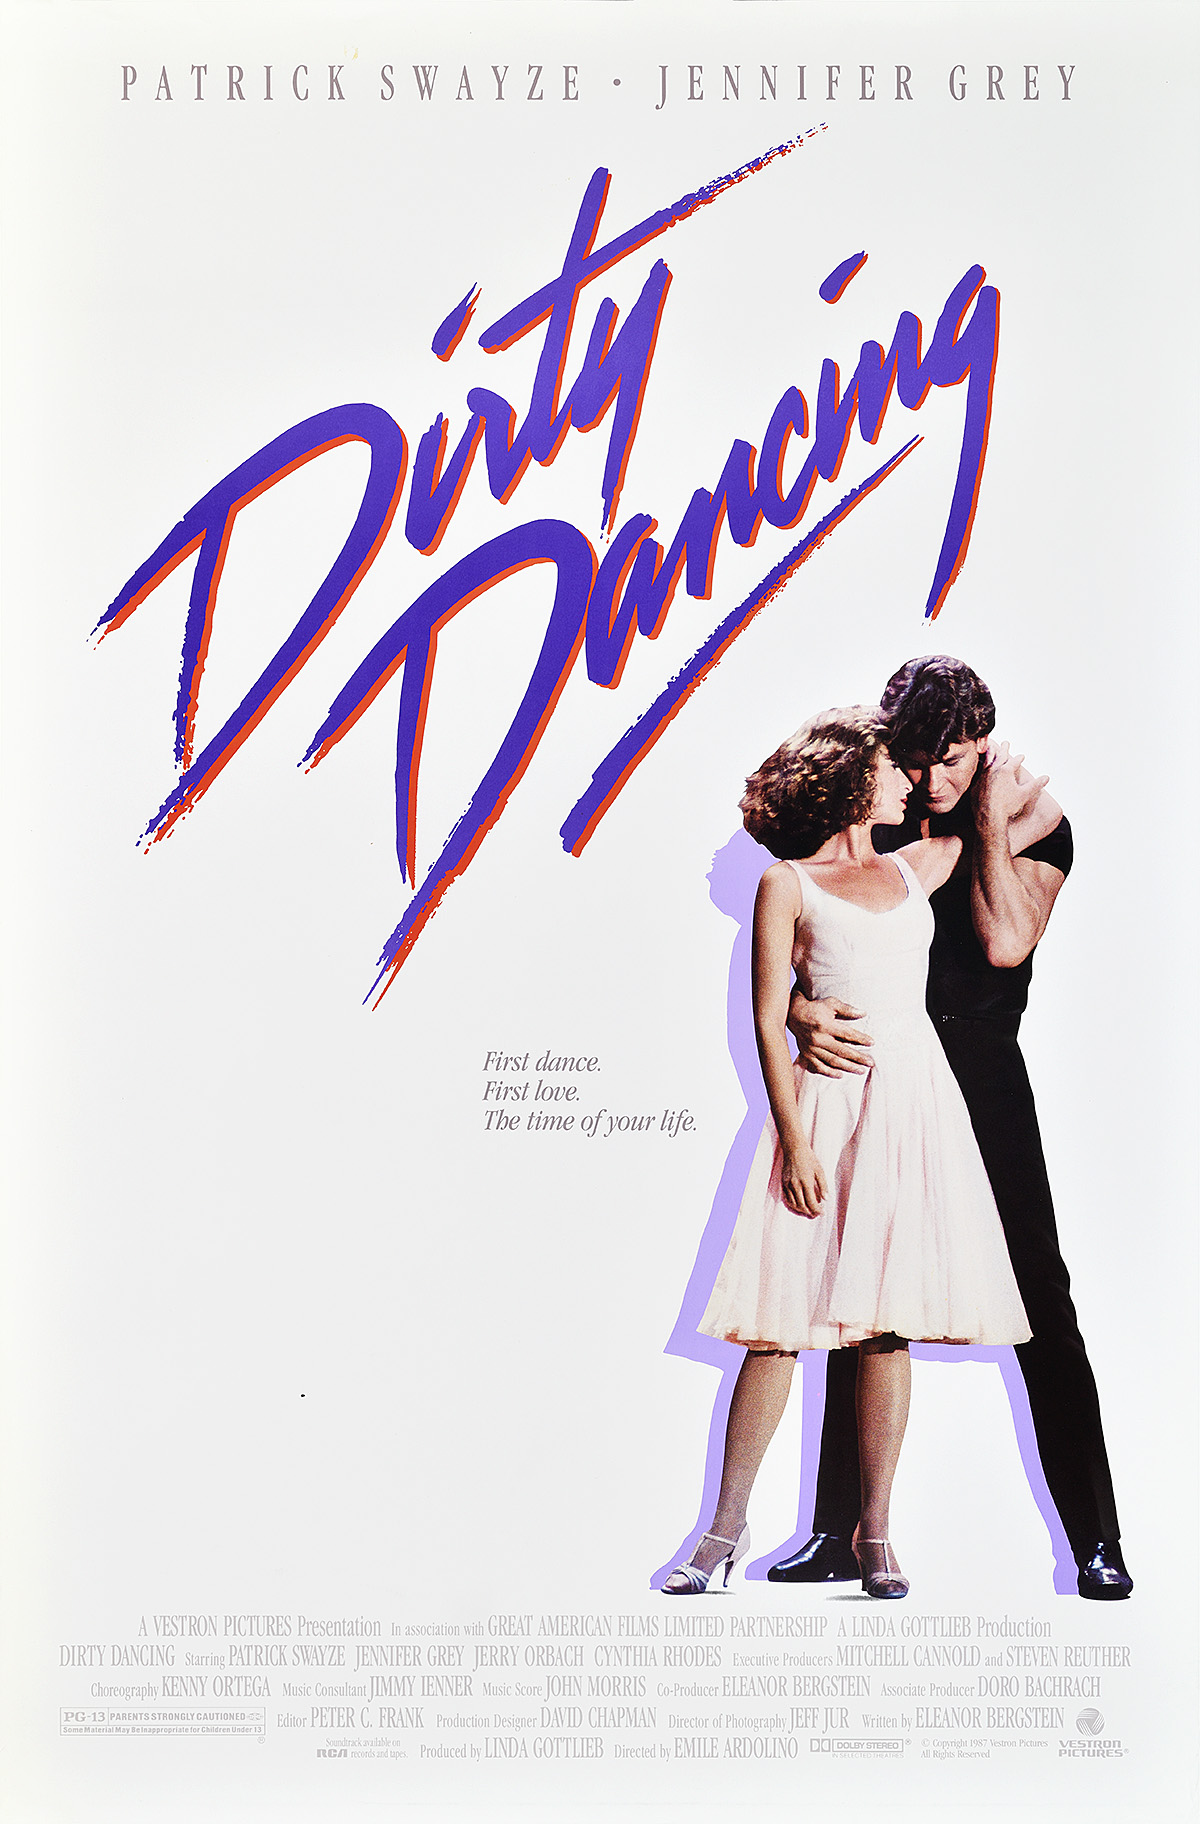 A poster of a man and a woman in a dancing embrace under the text 'Dirty Dancing.'